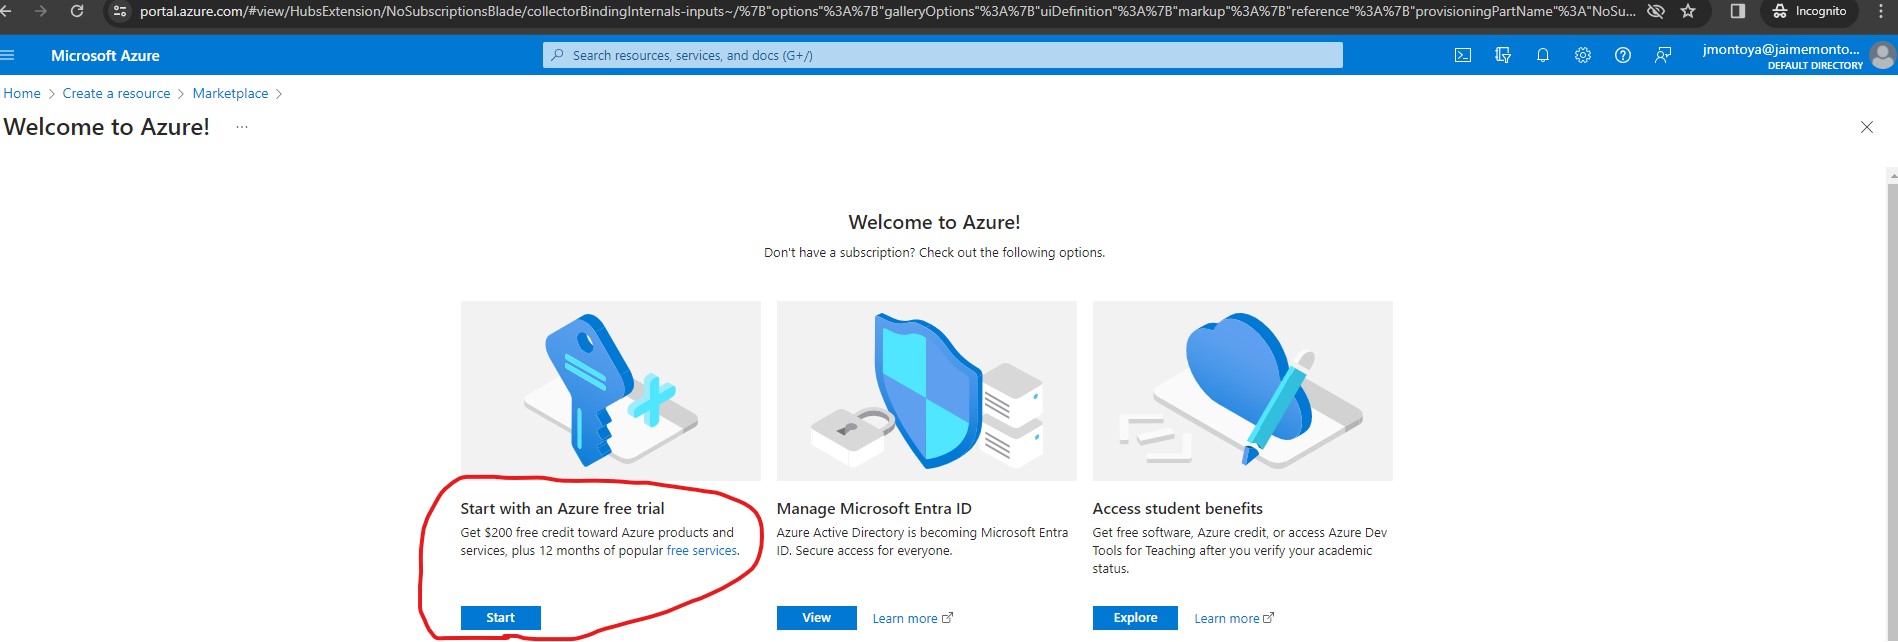 Start with an Azure free trial